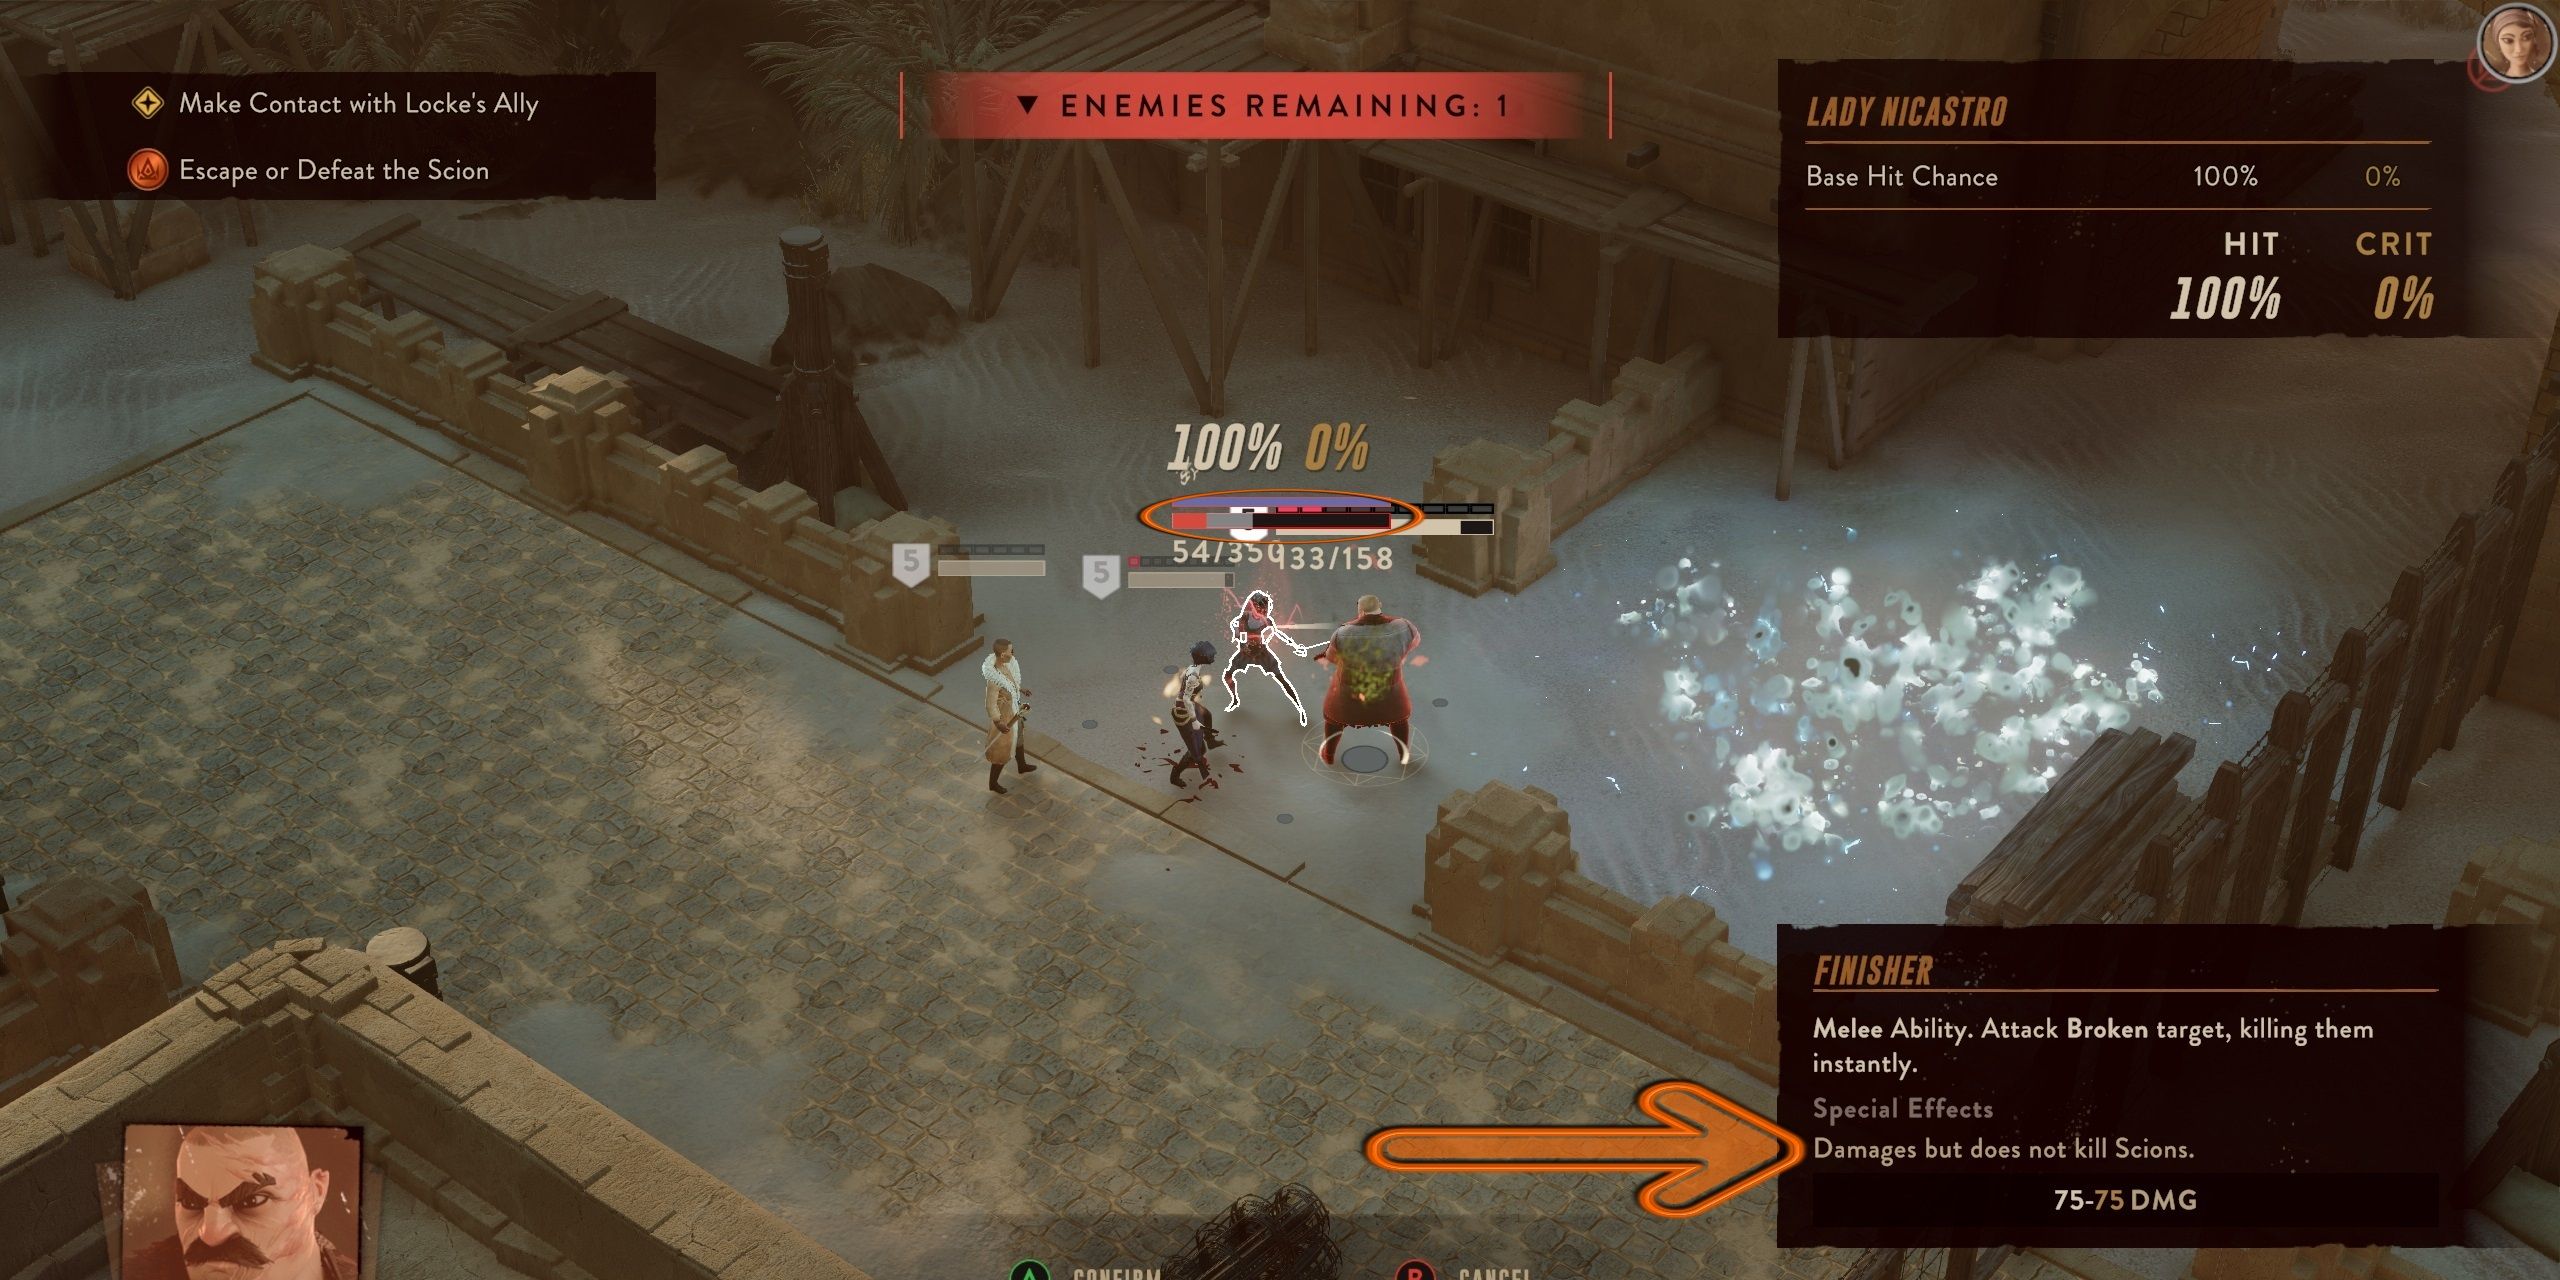 Lady Nicastro surrounded by the Lamplighters. Fedir prepares to do a Finisher on her. An orange circle highlights that the move will damage but not kill her. On the bottom right, an orange arrow points to the line 